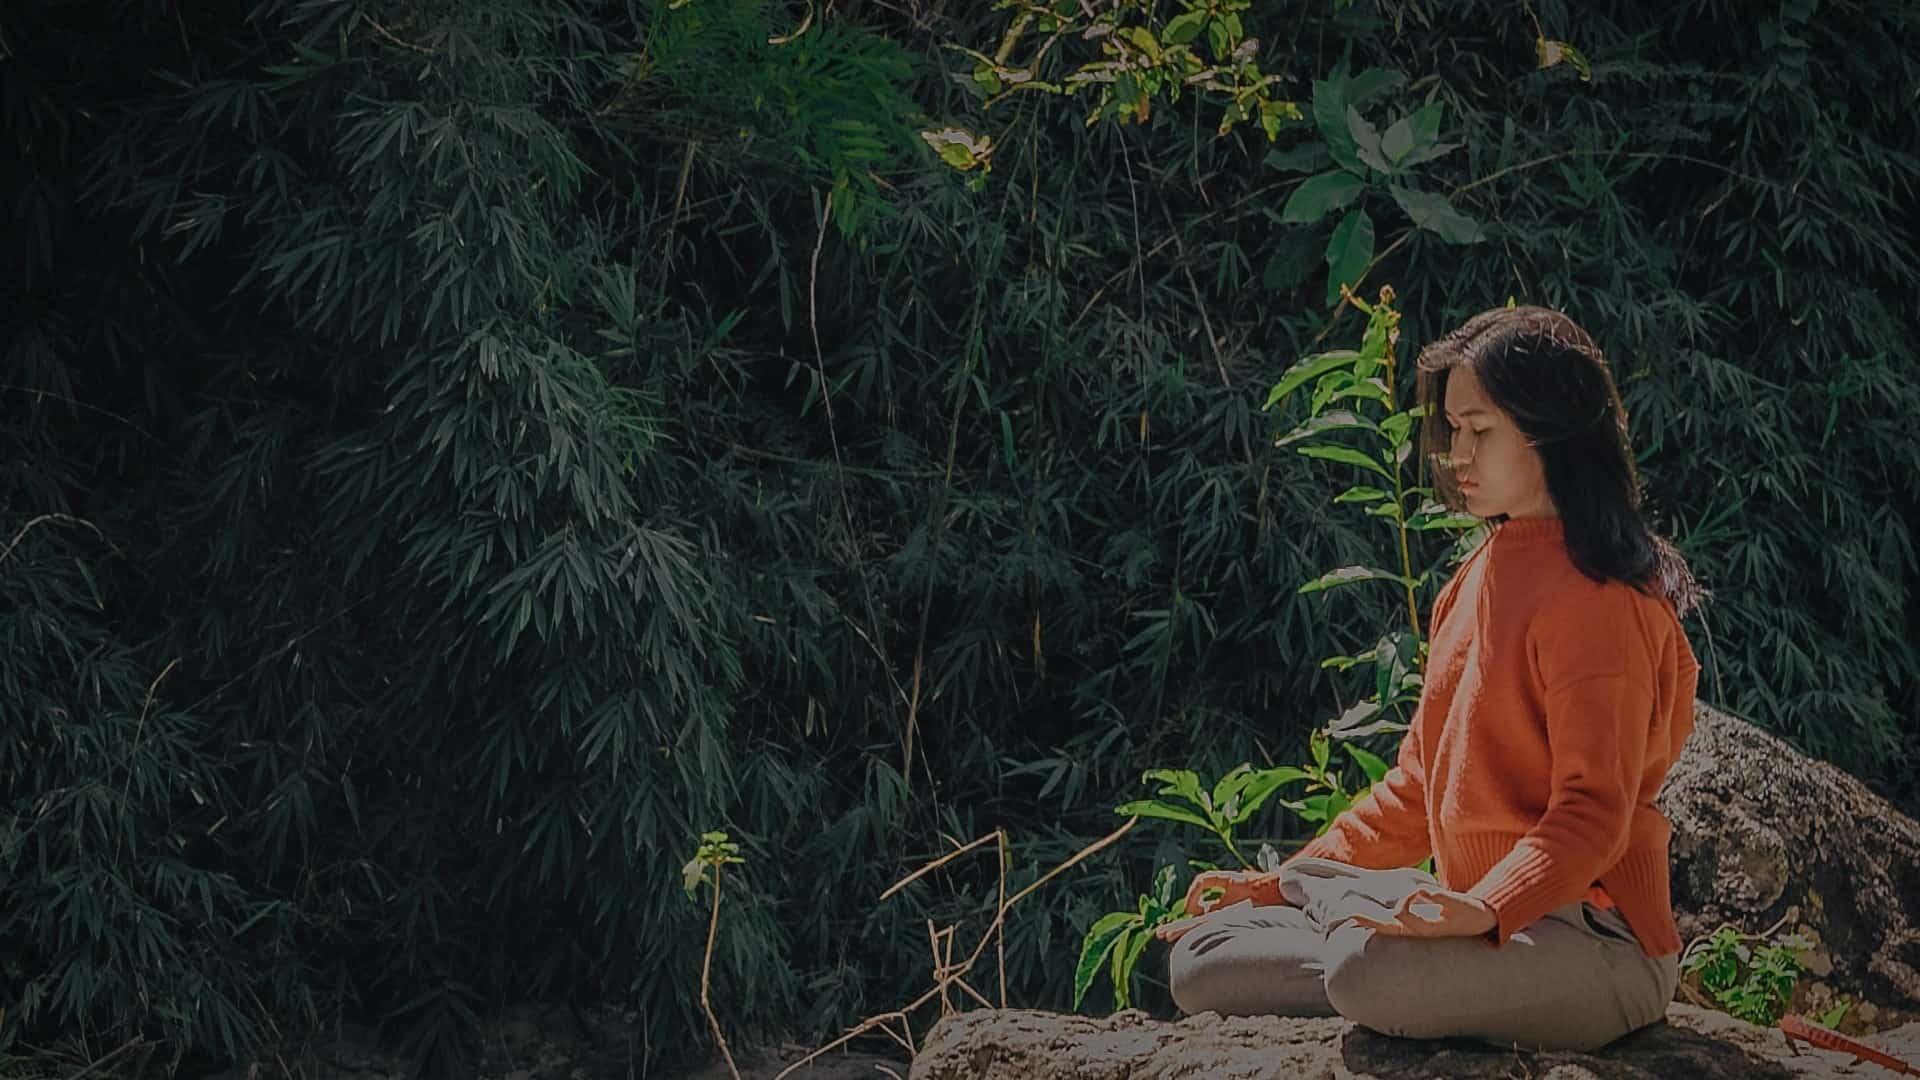 Let’s Talk About Meditation in Life